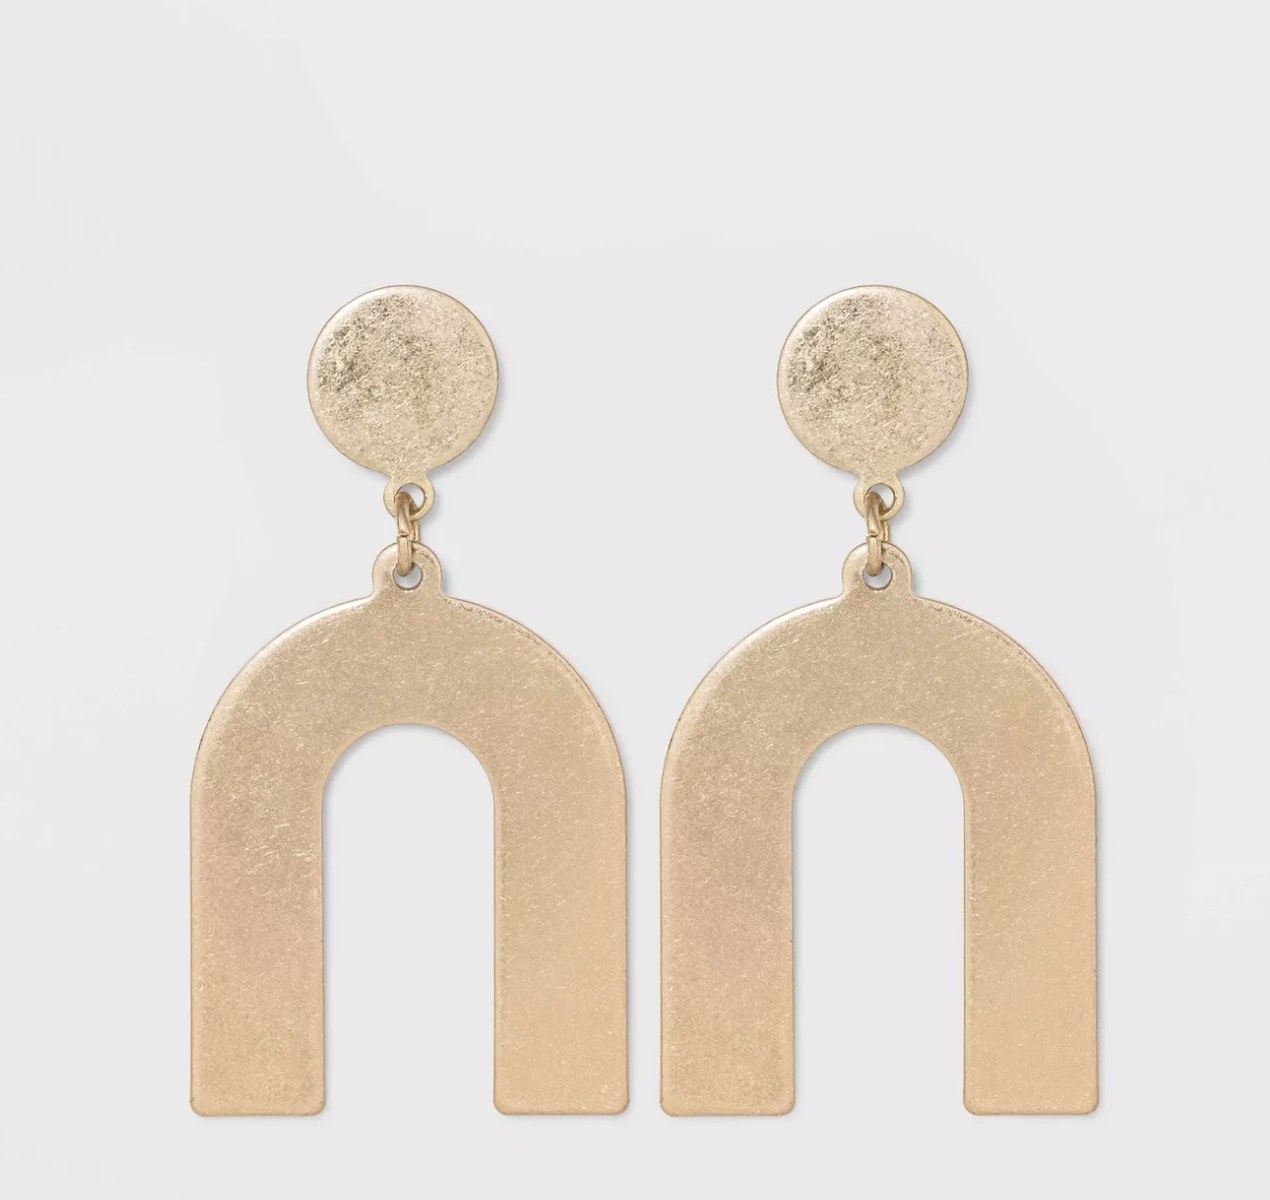 The gold earrings have a circular base and an upside down U-shape connected to them